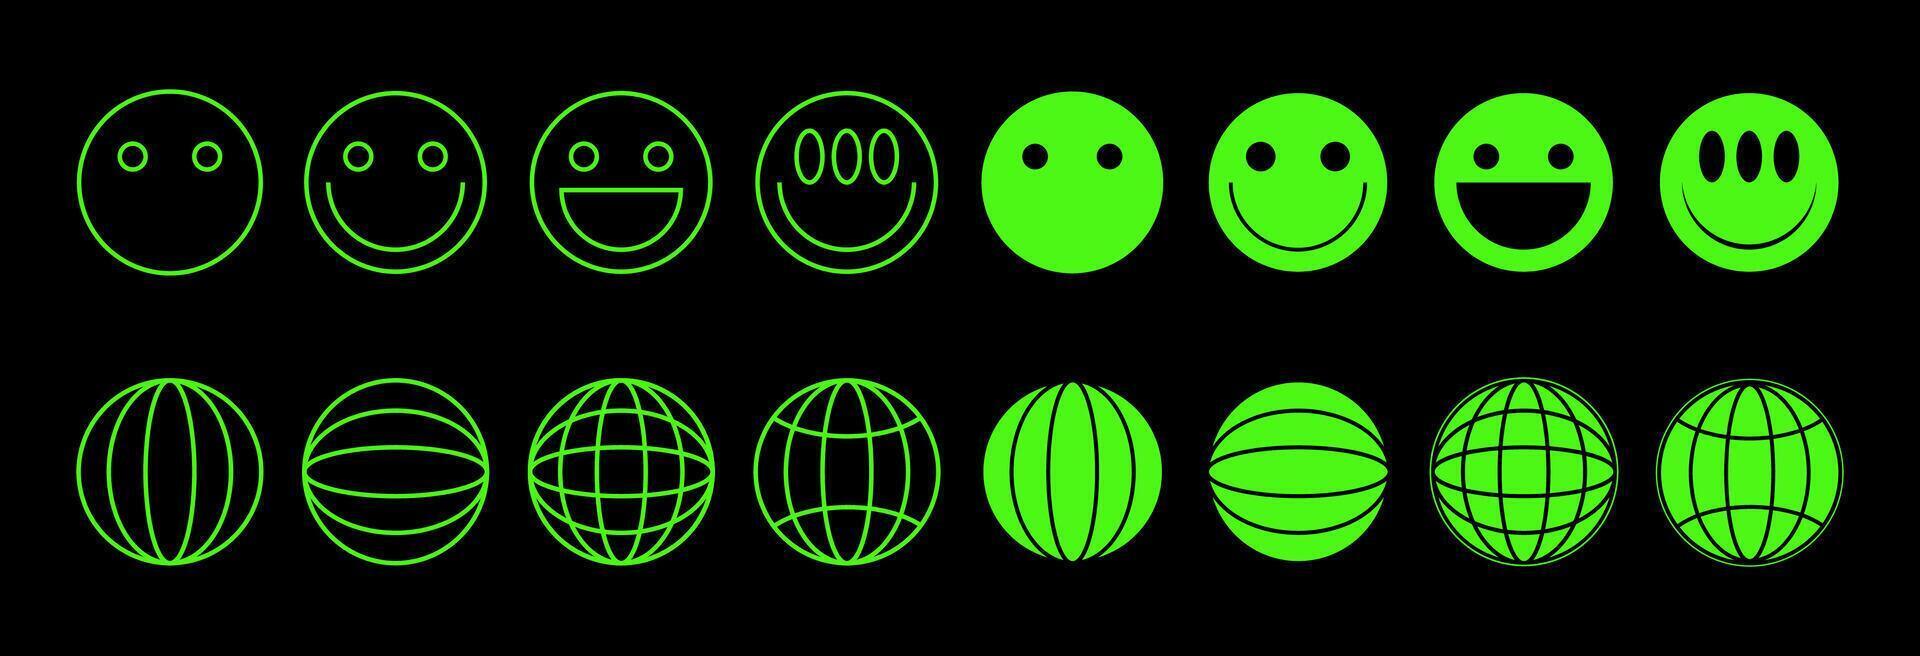 Y2k acid crazy symbols, signs, faces on a black background, collection of isolated design elements. illustration. vector